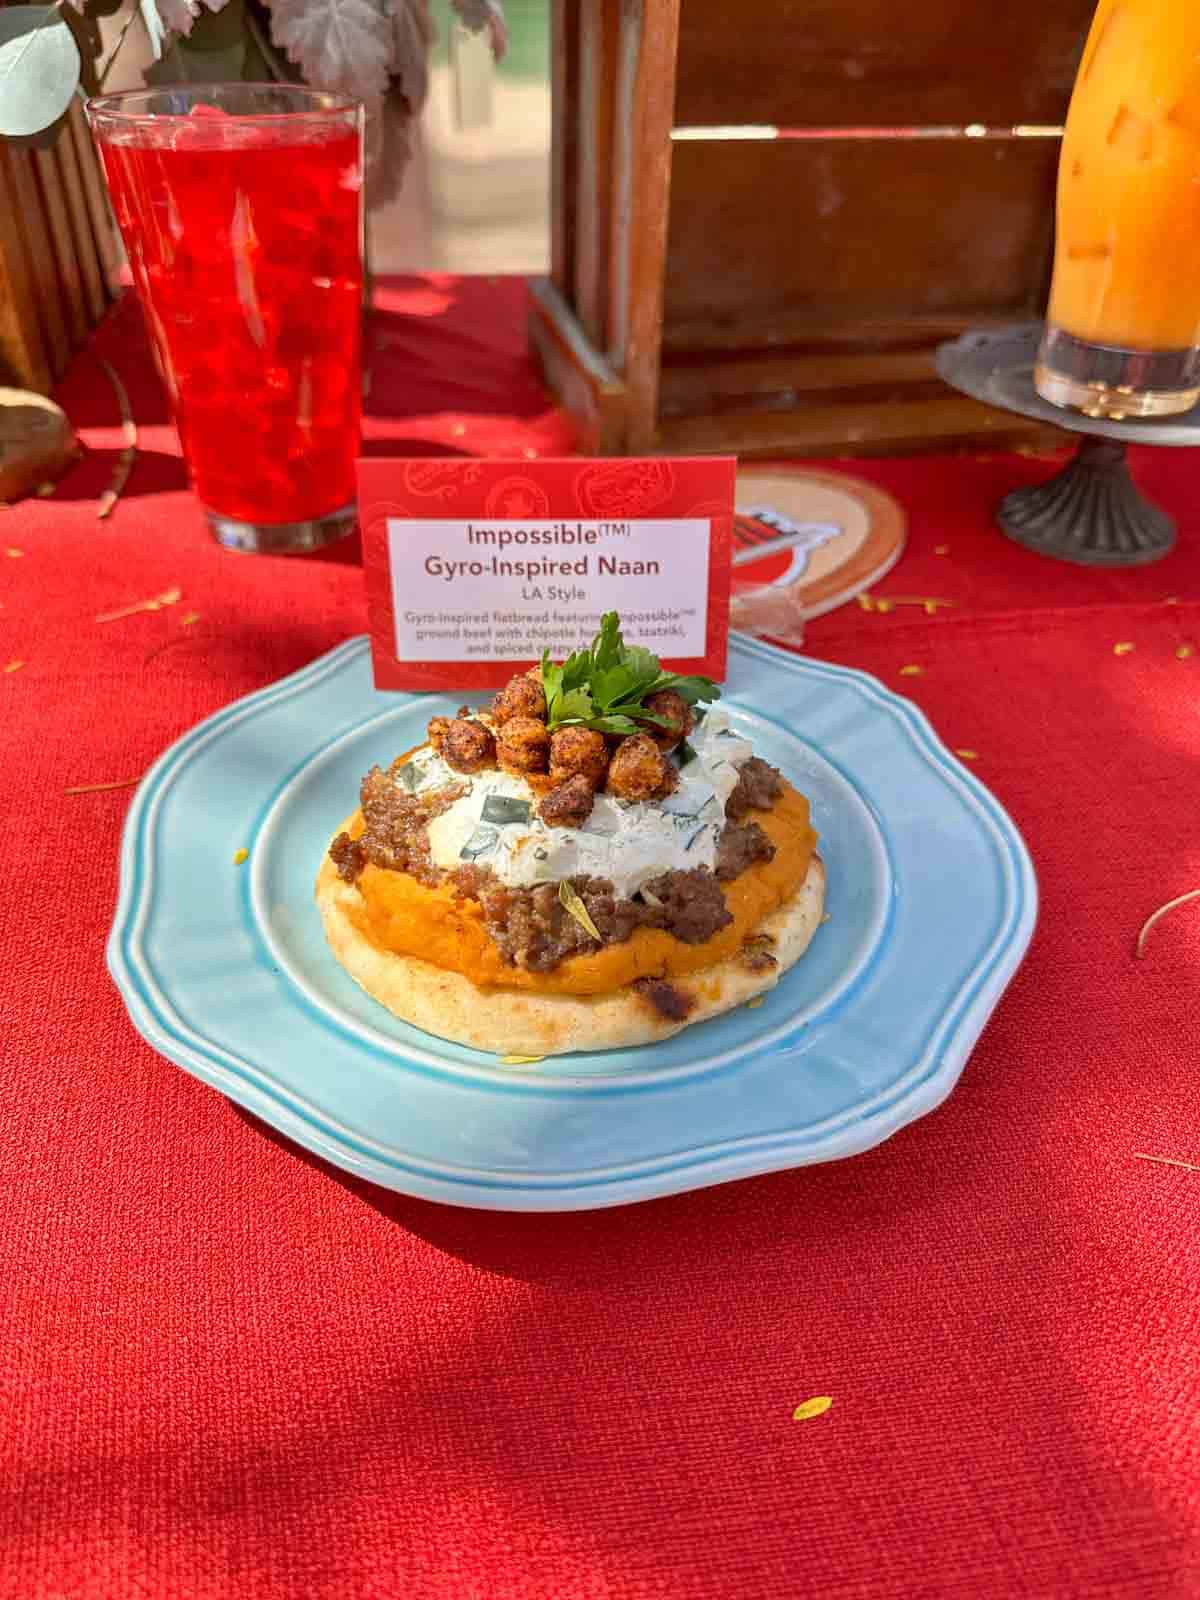 A piece of round naan bread with hummus, ground meat, tzatziki sauce and crispy chickpeas on a blue plate.